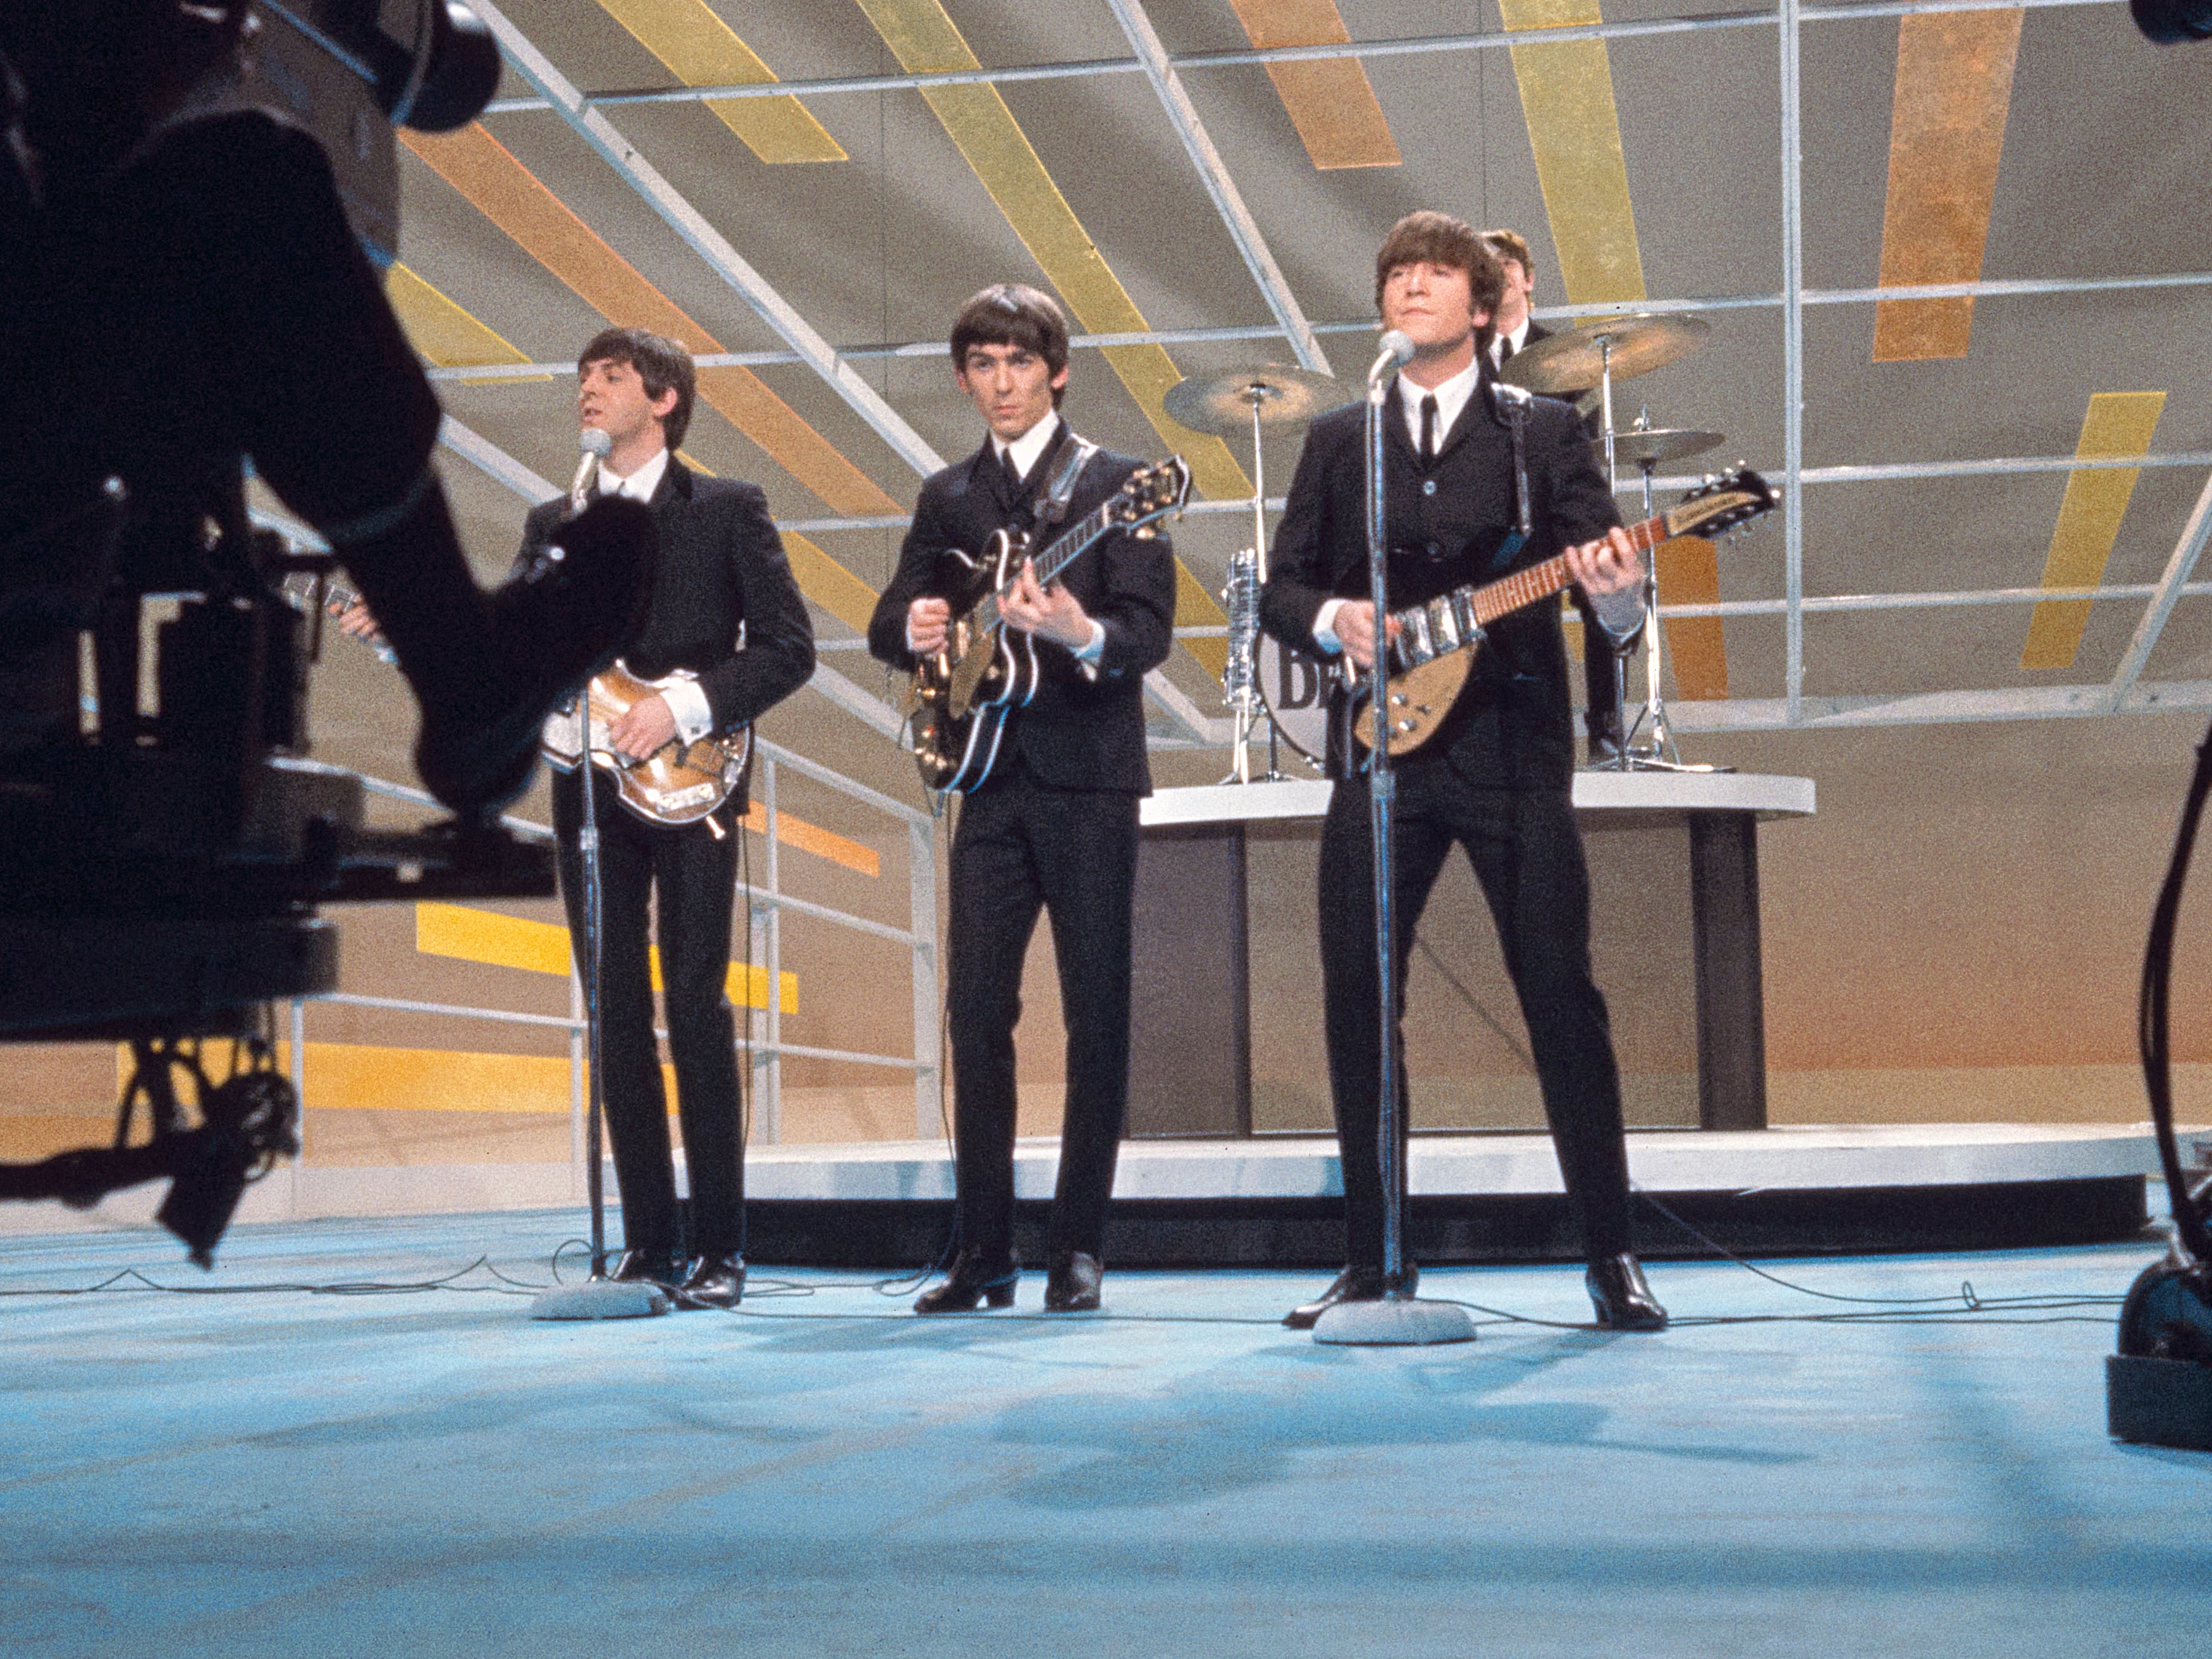 The Beatles performing on the ‘The Ed Sullivan Show’ in New York City in February 1964